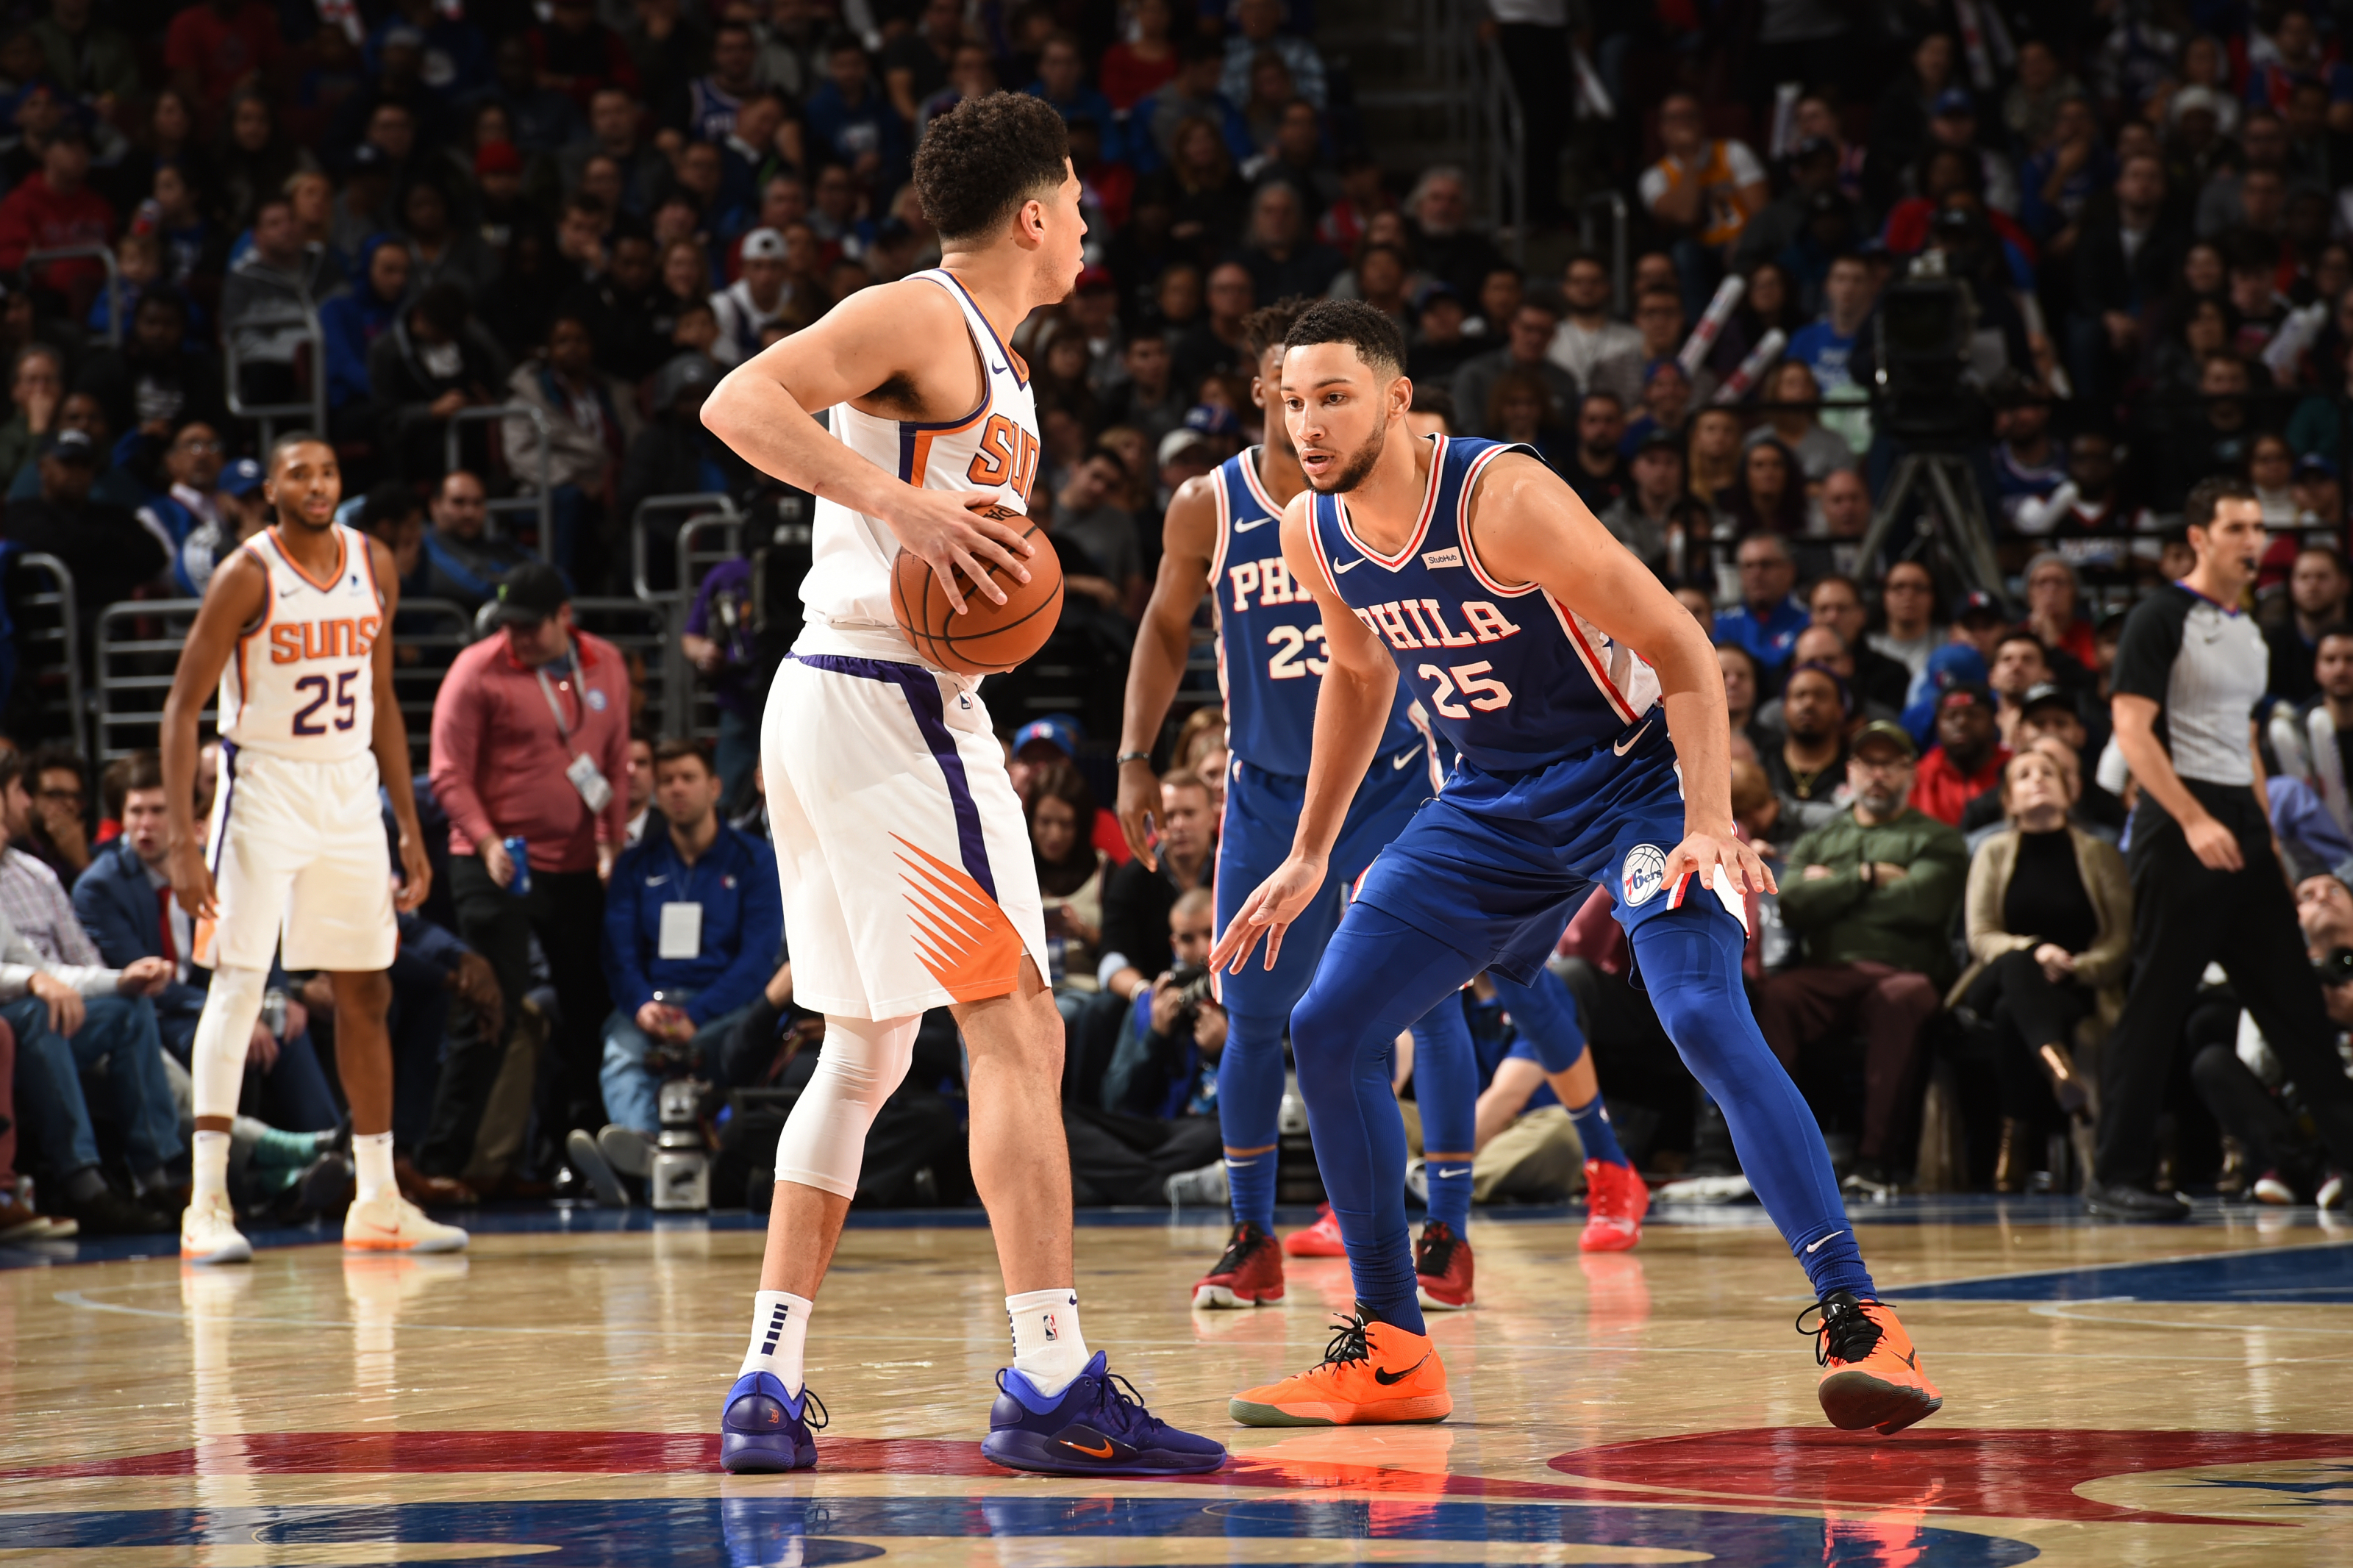 The Ben Simmons Situation - The Phoenix